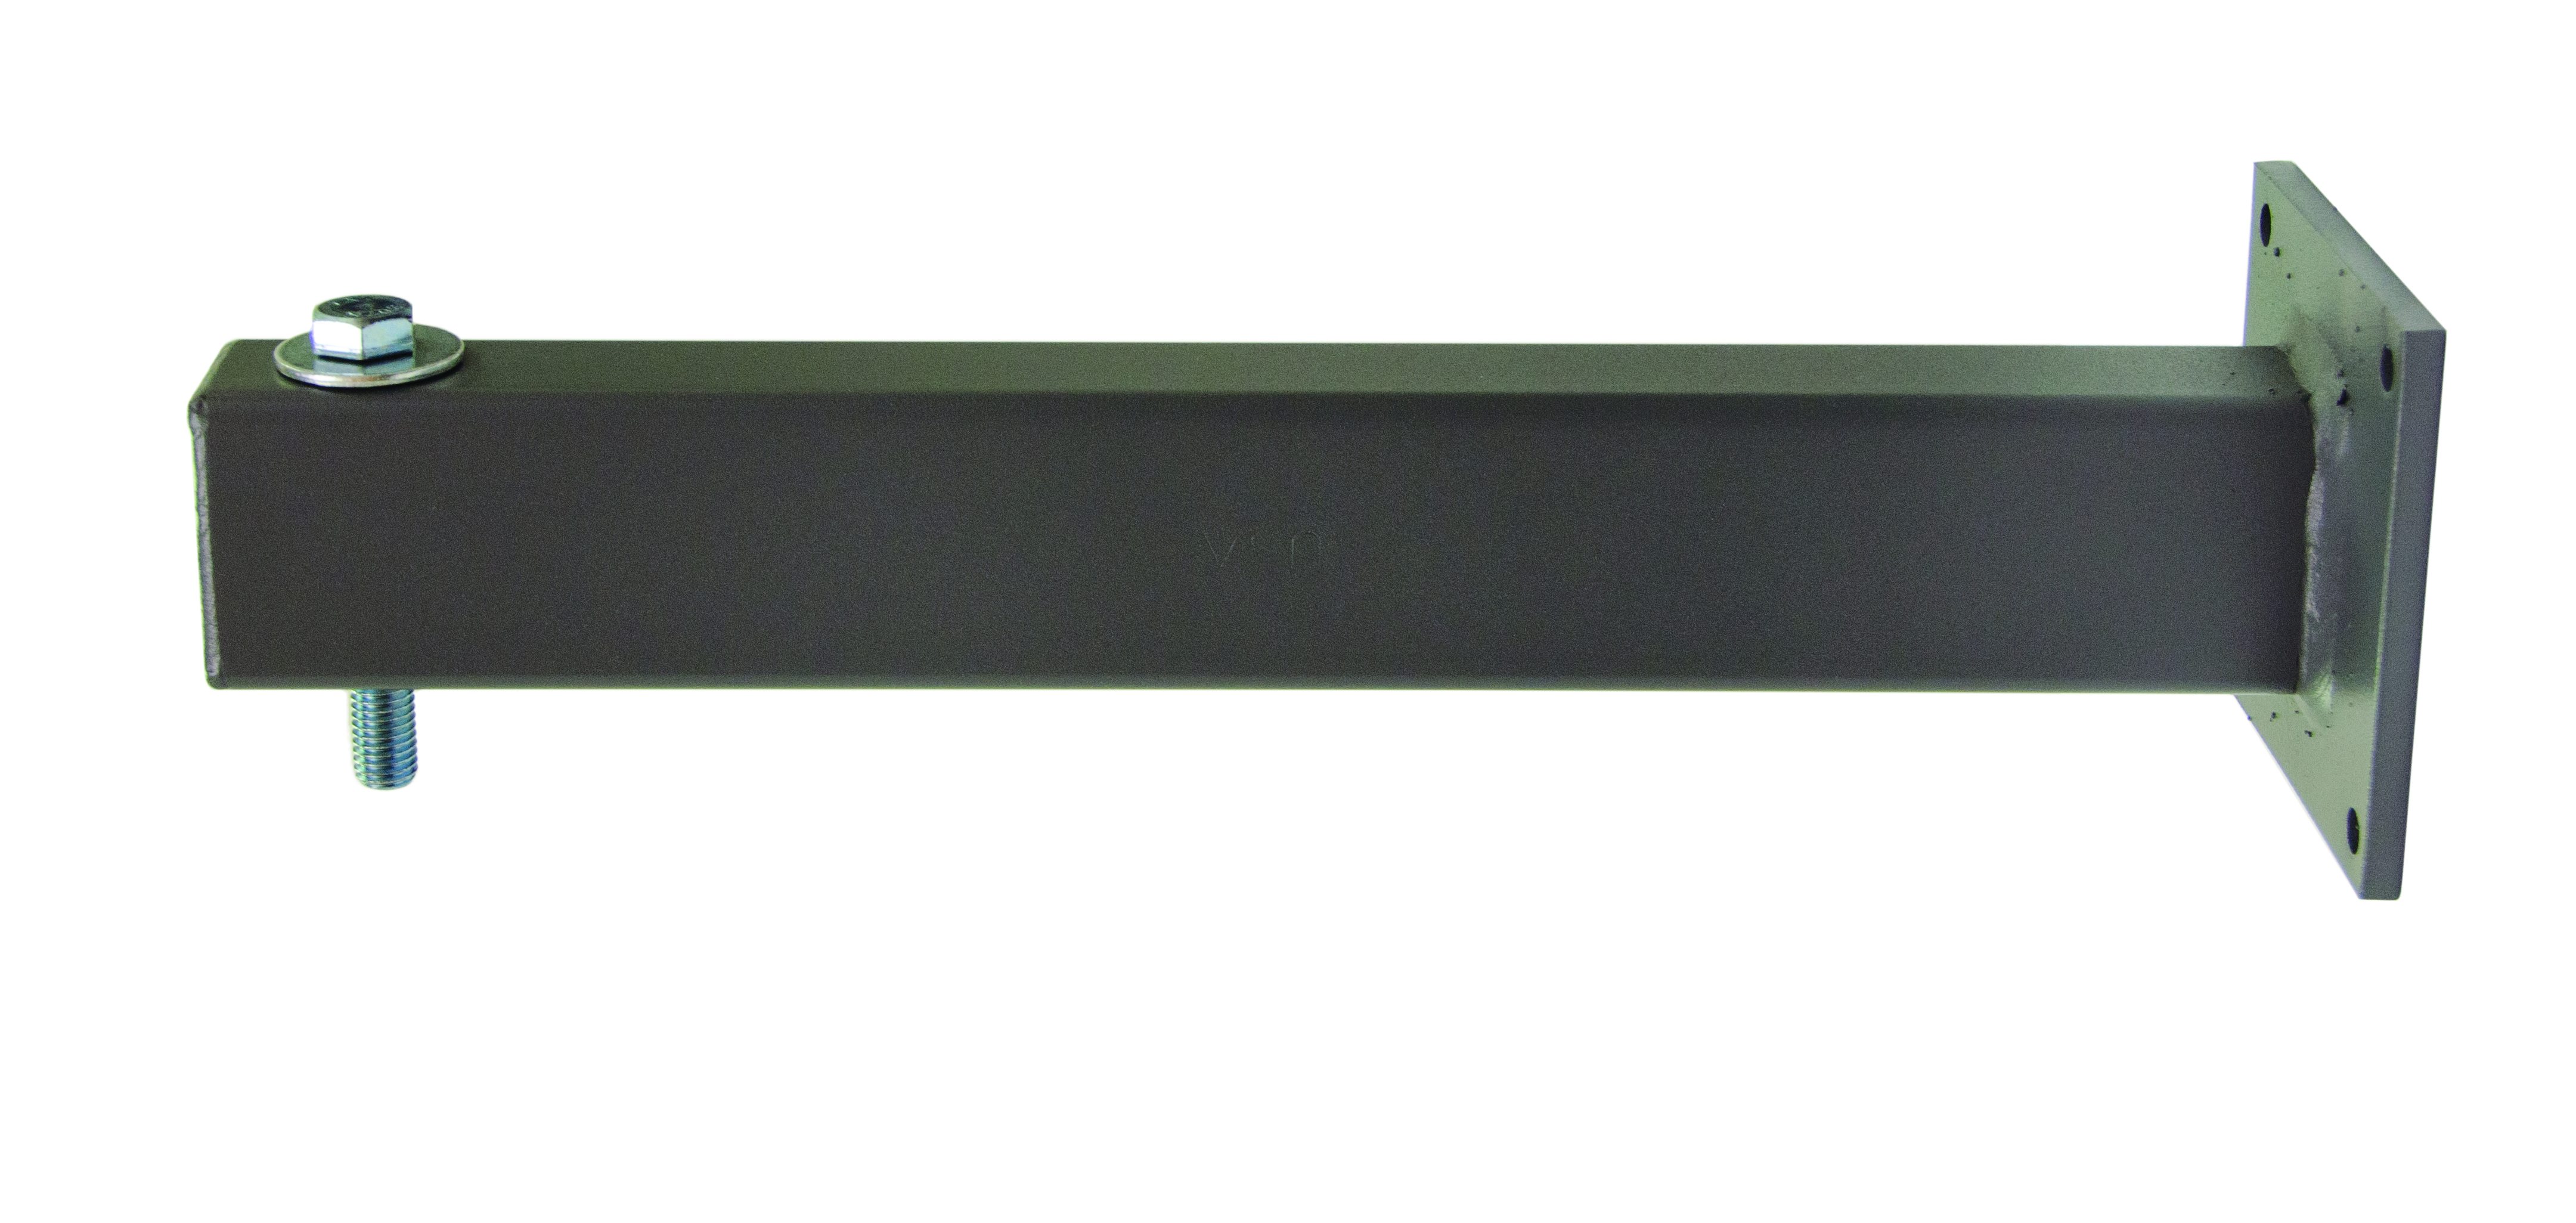 Wall Mounting Bracket, Heavy Duty Epoxy Powder Coated Finish. For Use With 5550 Series Washdown Fan Forced Unit Heater